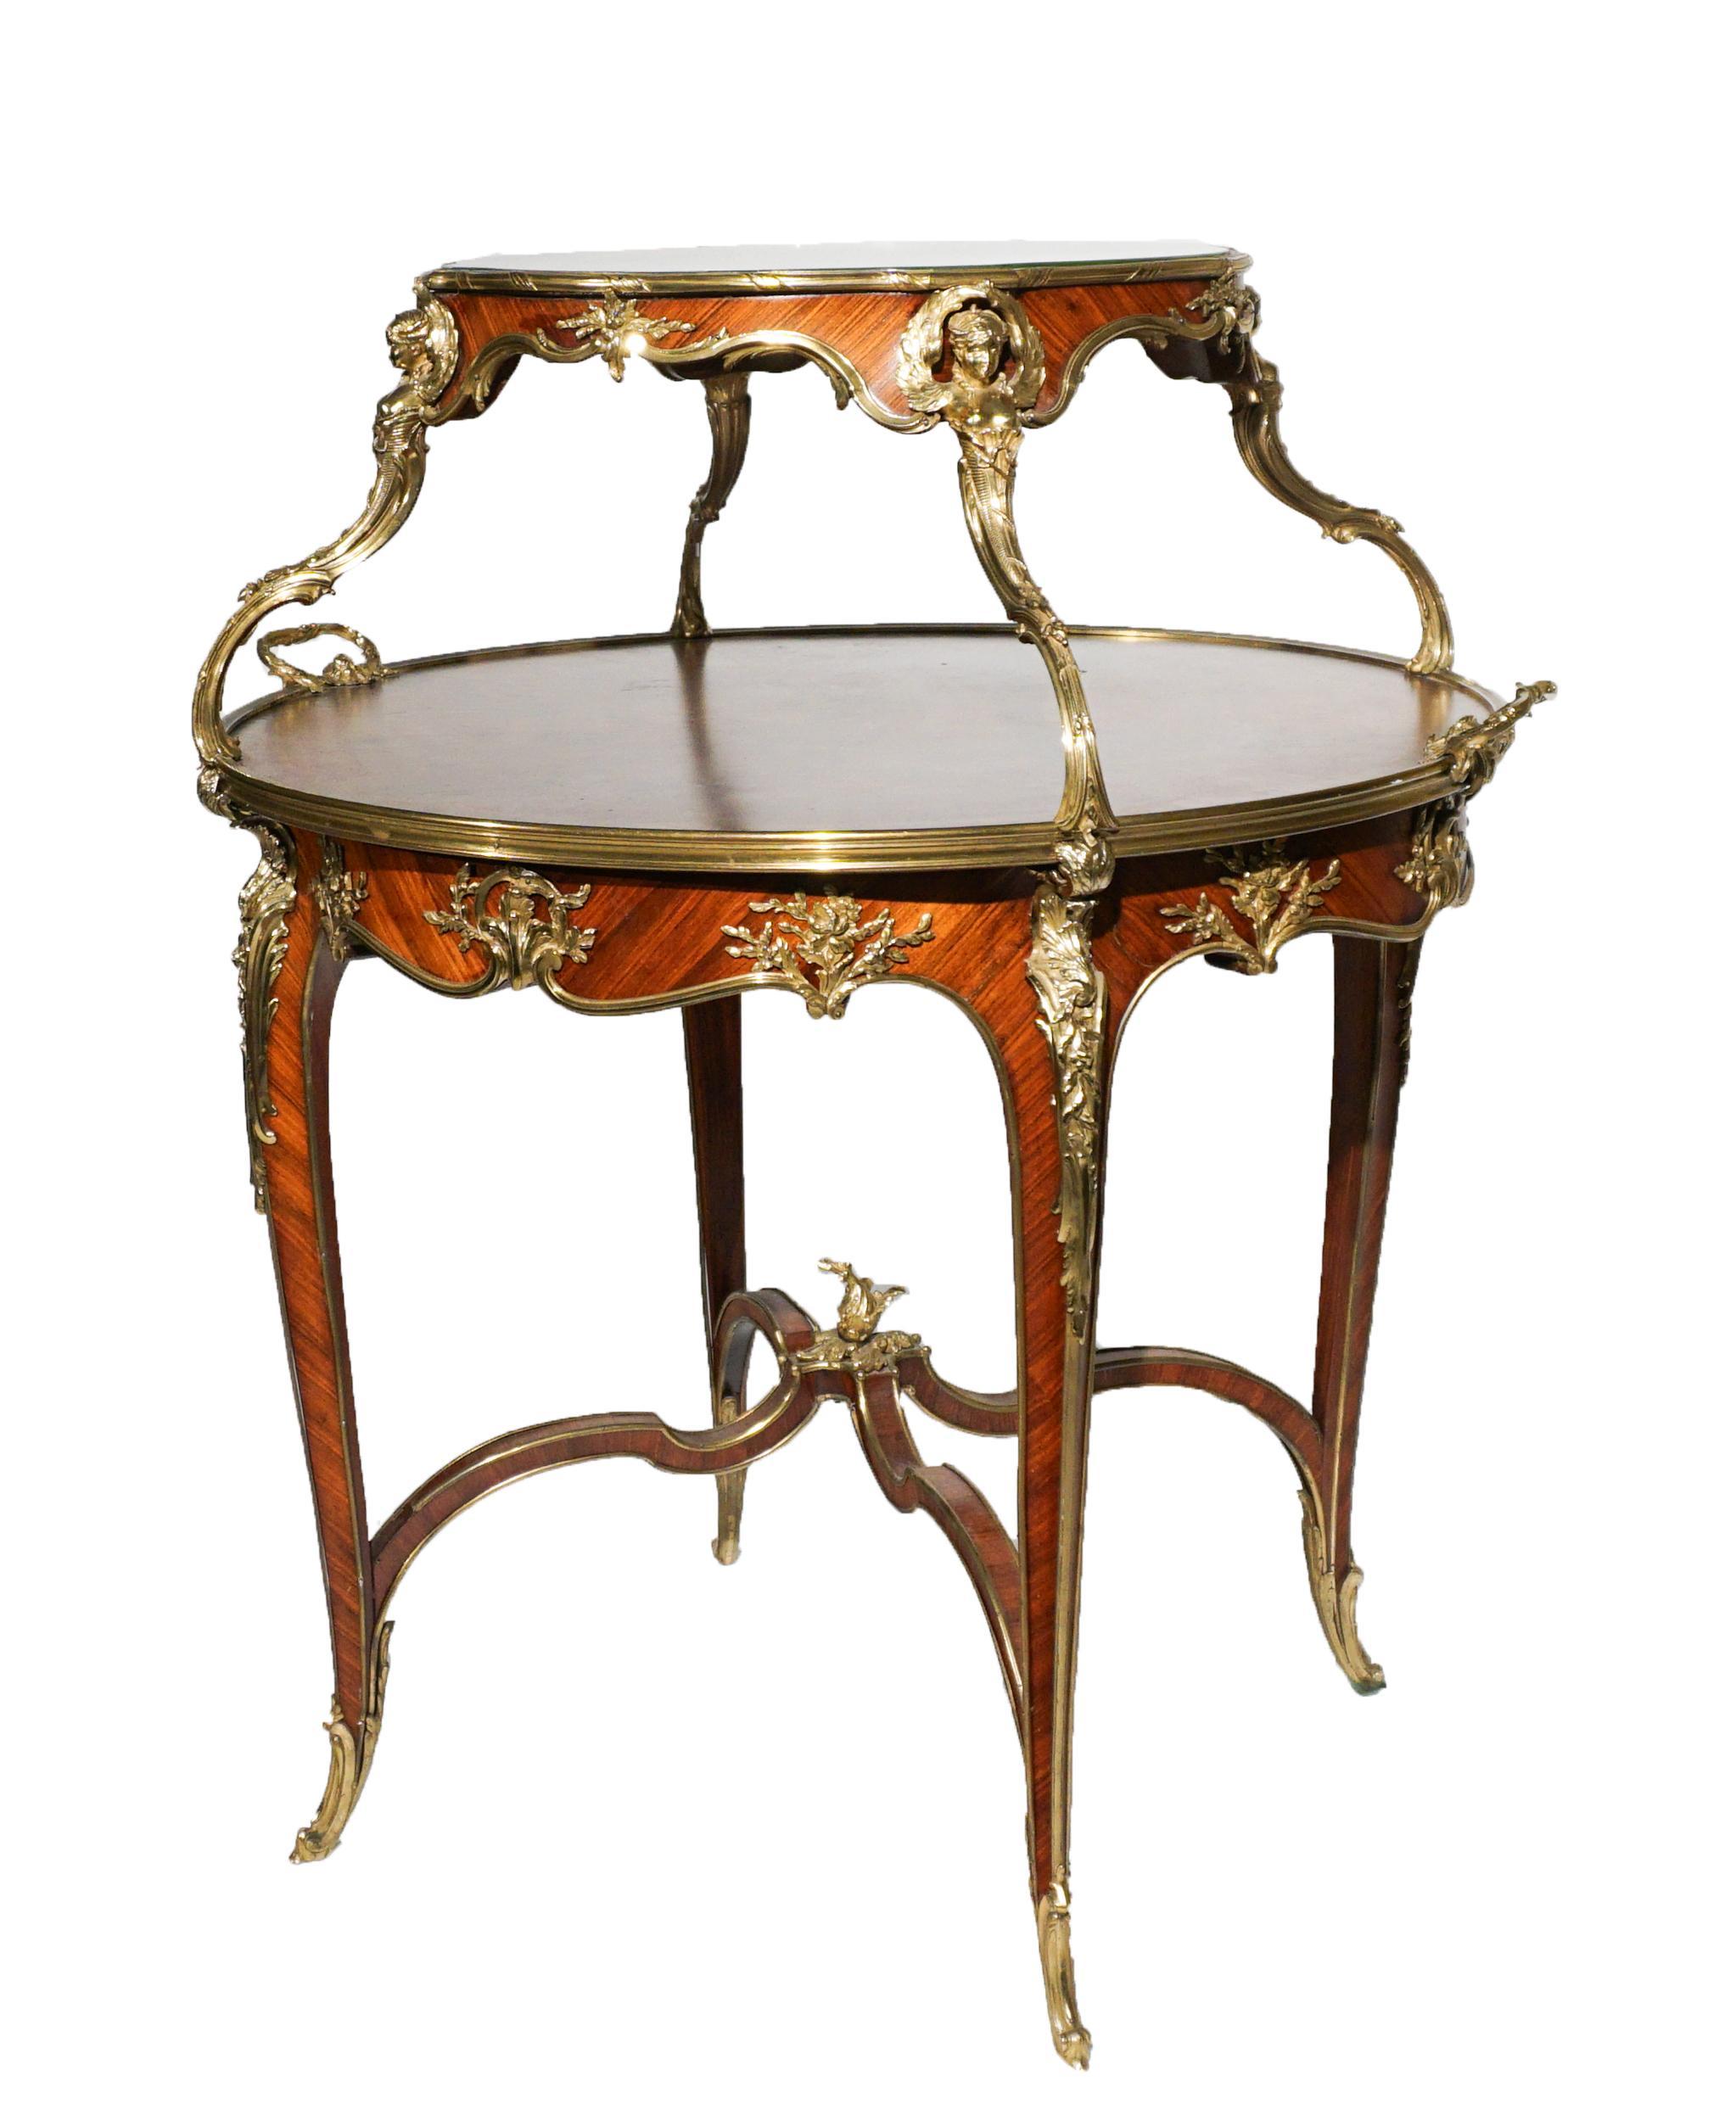 19th C. Joseph E. Zwiemer Kingwood, Satine and Bois de Bout Marquetry Tea Table For Sale 6